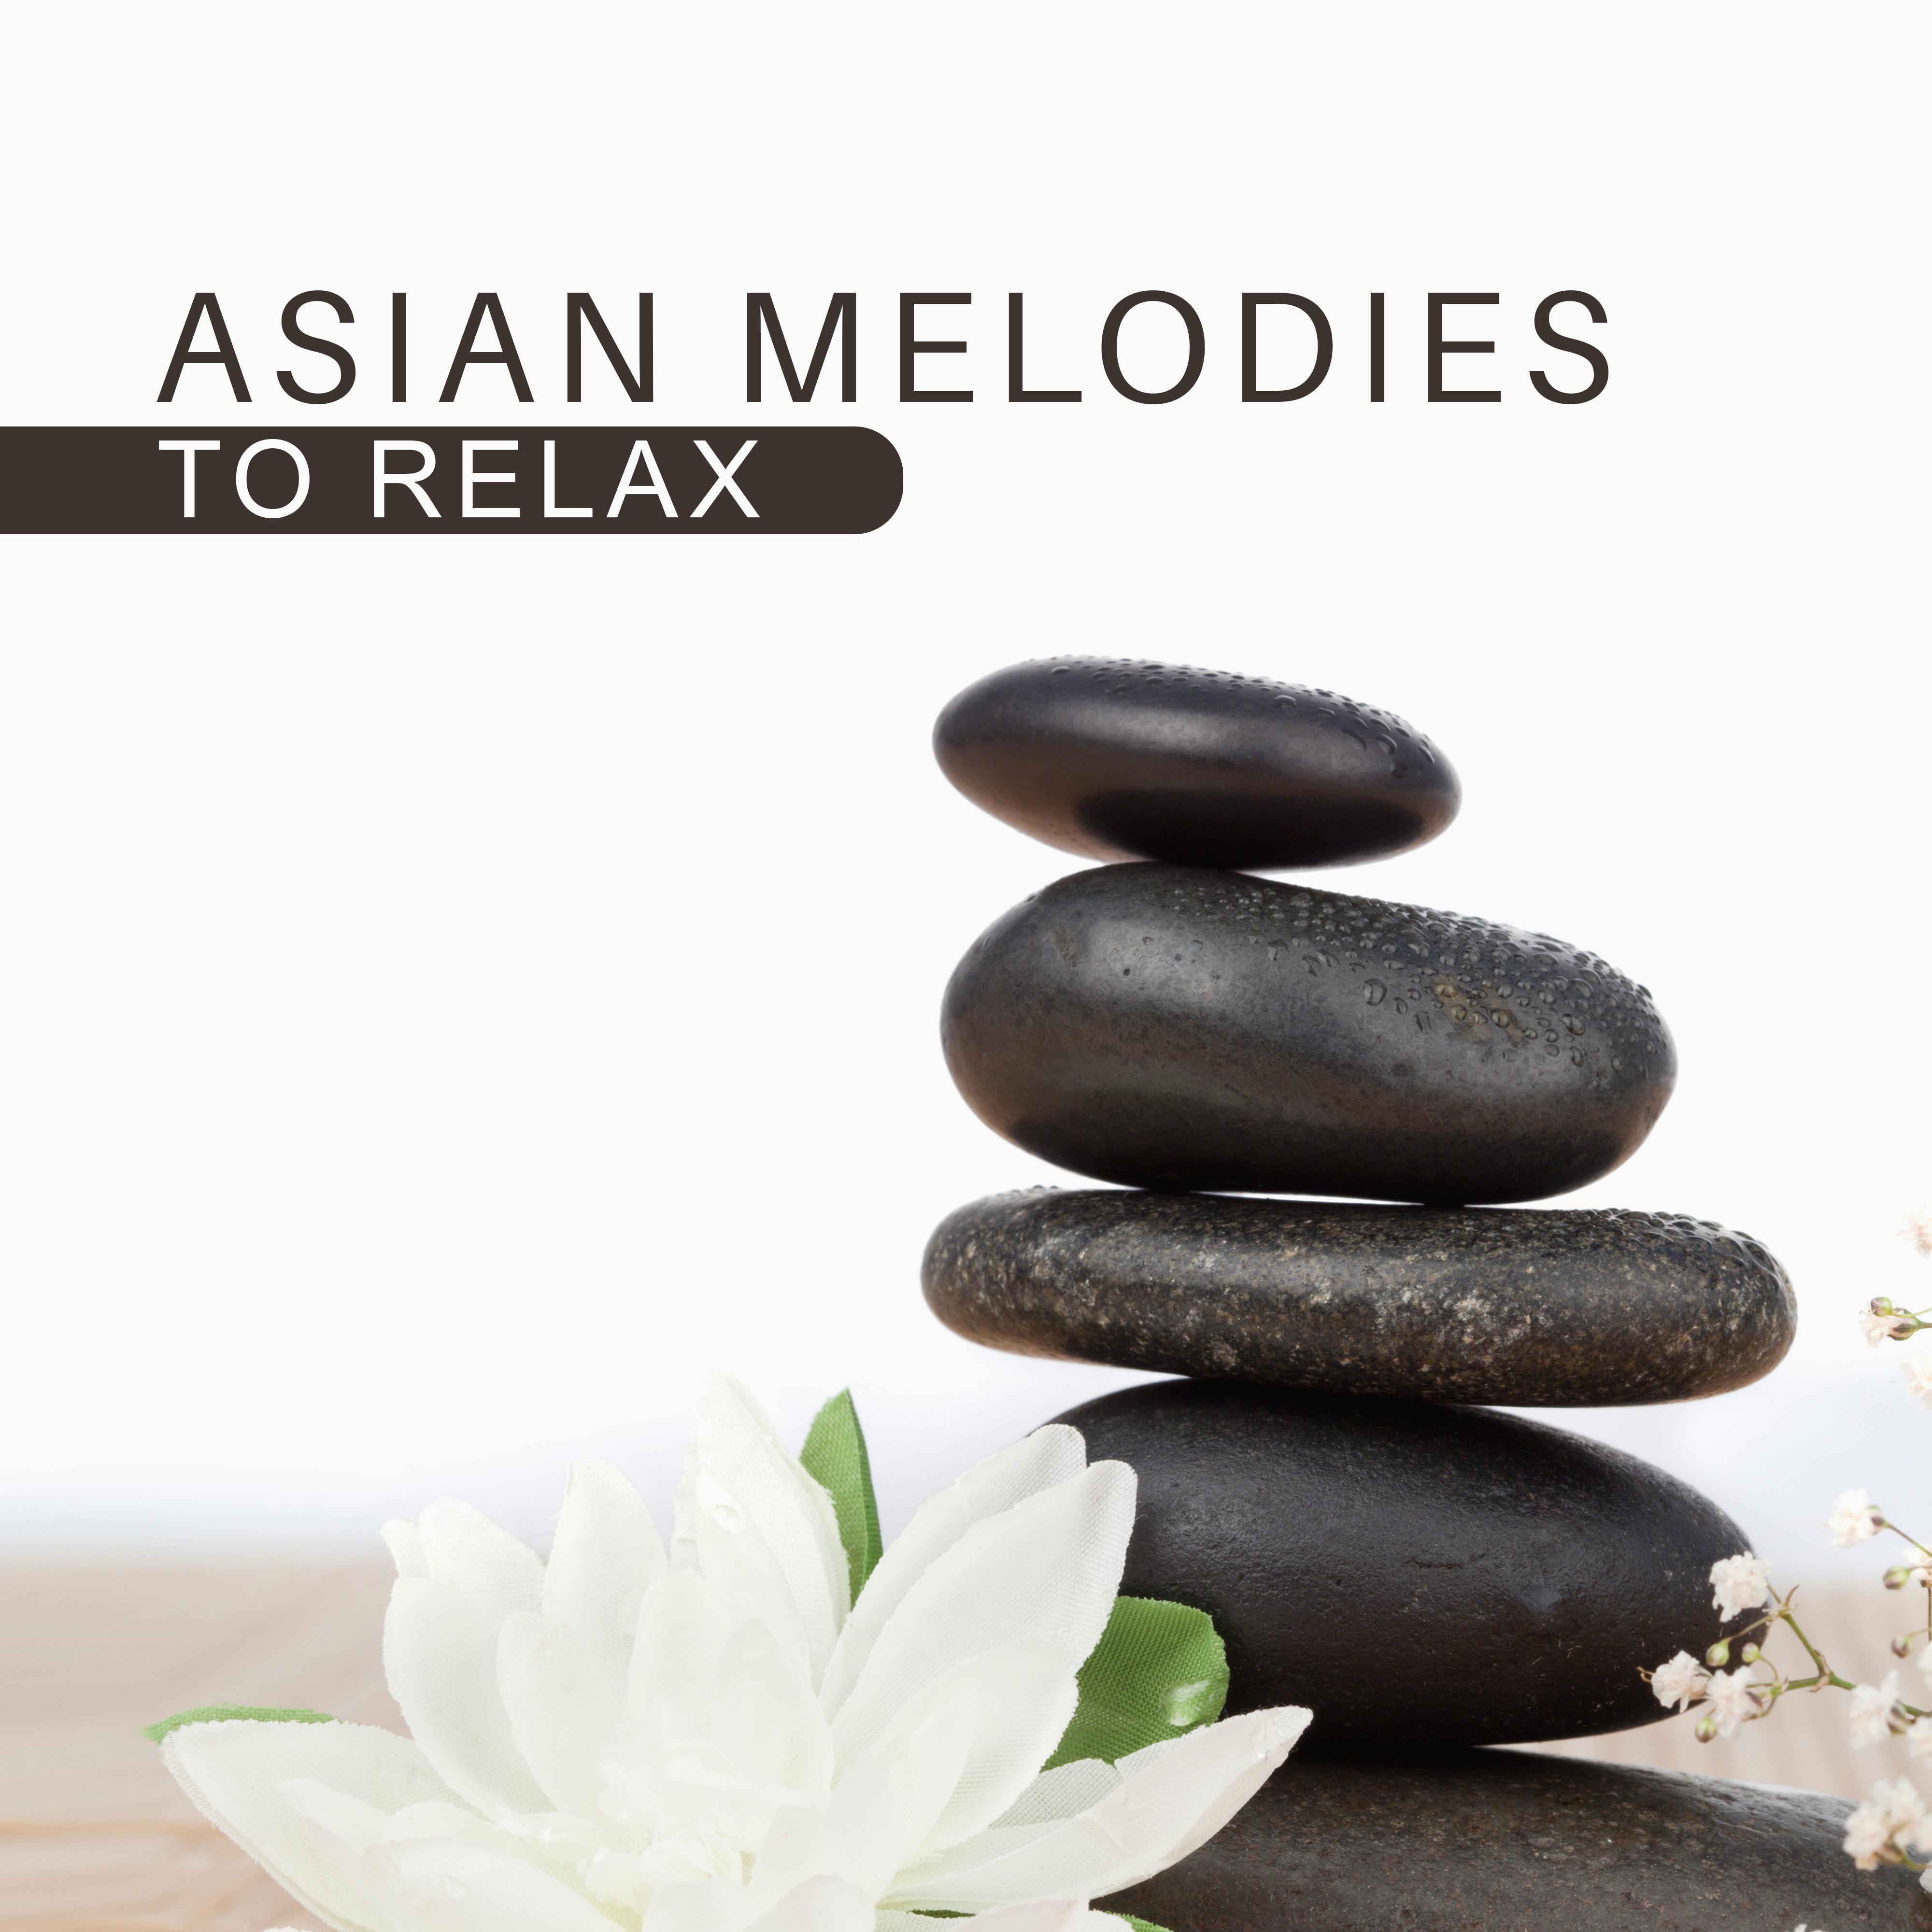 Asian Melodies to Relax